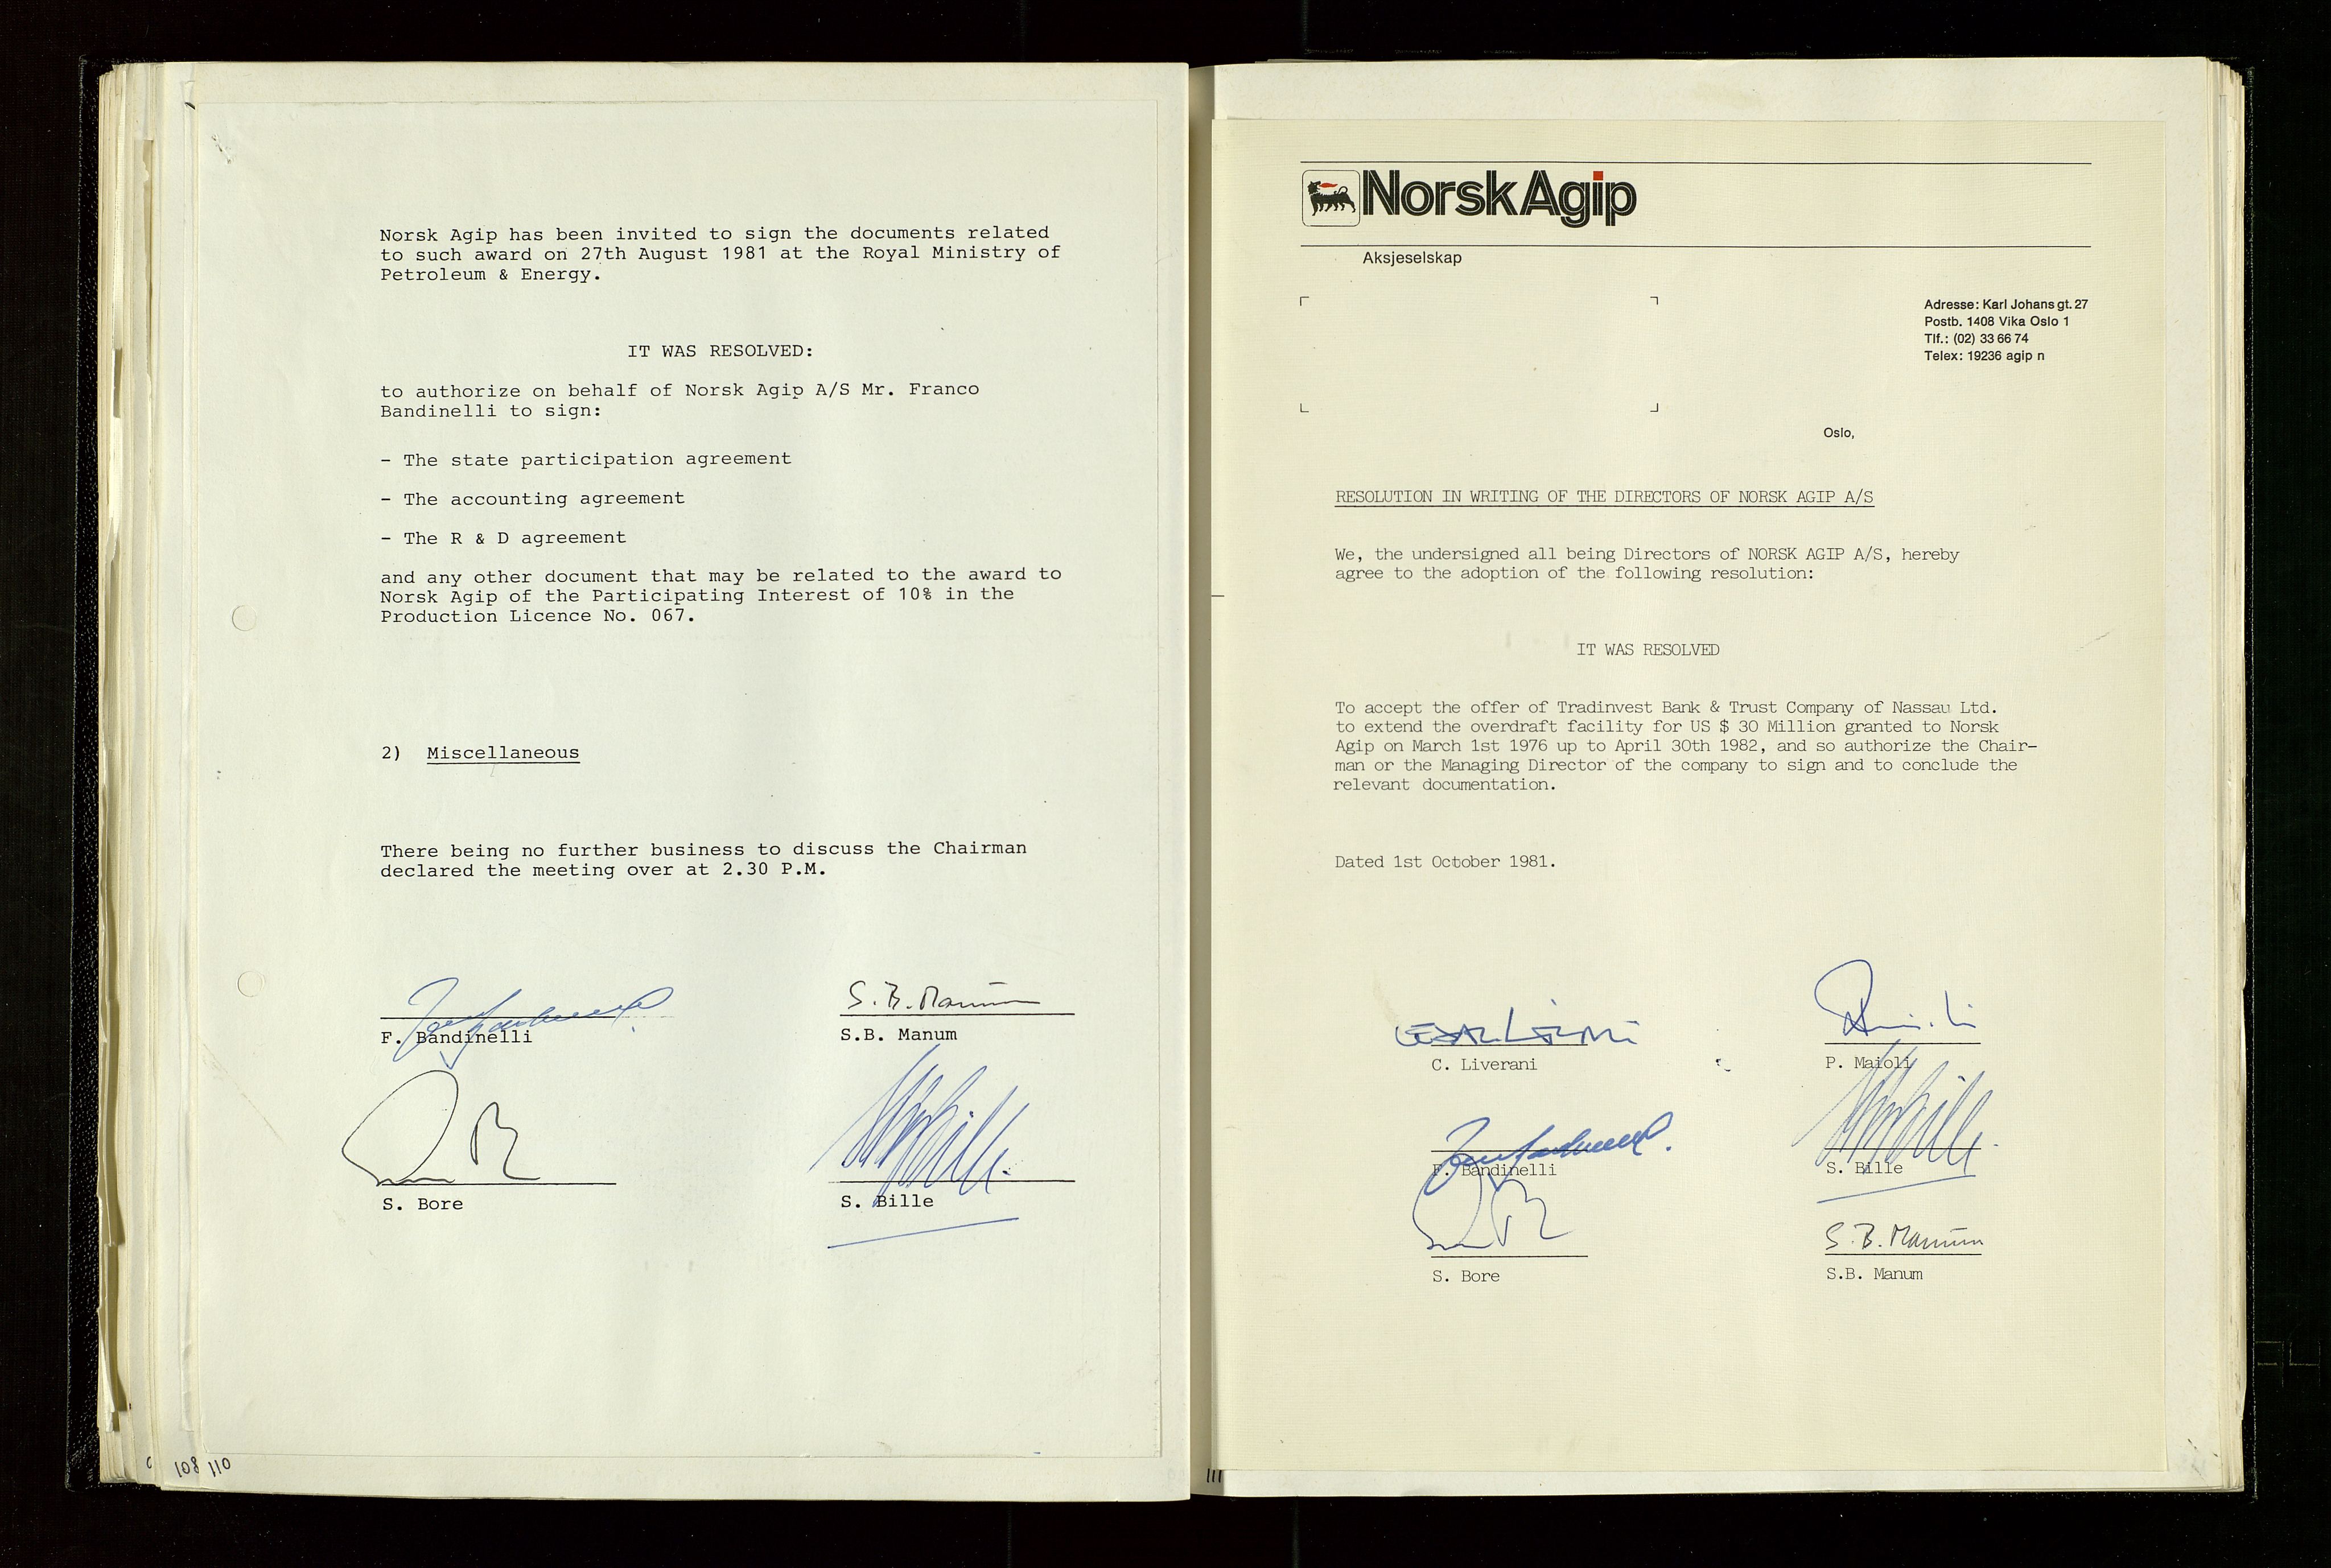 Pa 1583 - Norsk Agip AS, SAST/A-102138/A/Aa/L0003: Board of Directors meeting minutes, 1979-1983, s. 110-111